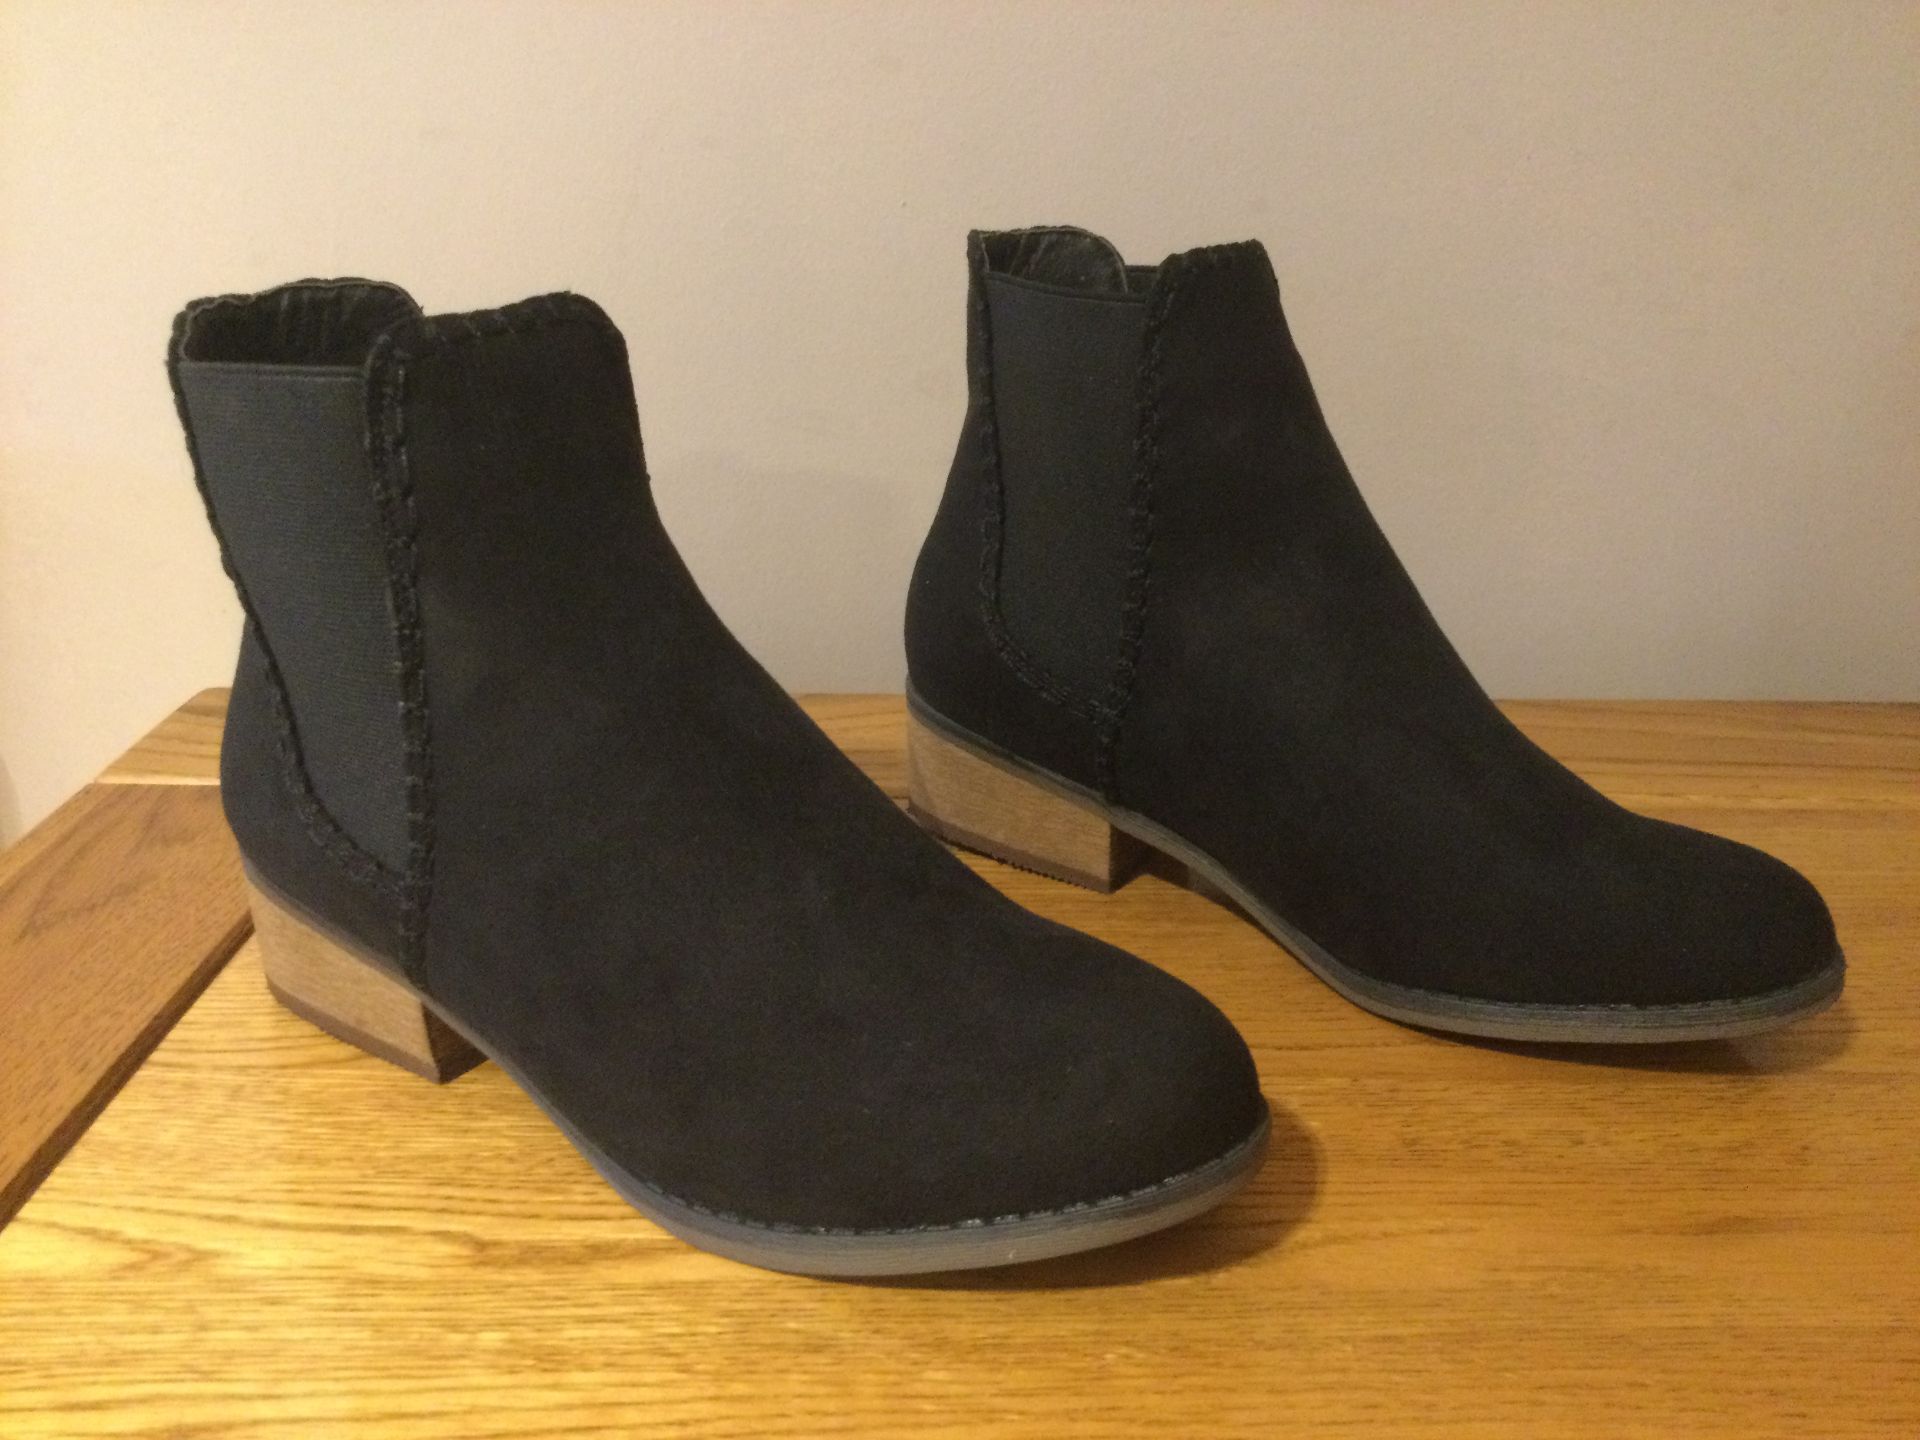 Dolcis “Pasha” Low Heel Ankle Boots, Size 5, Black - New RRP £45.99